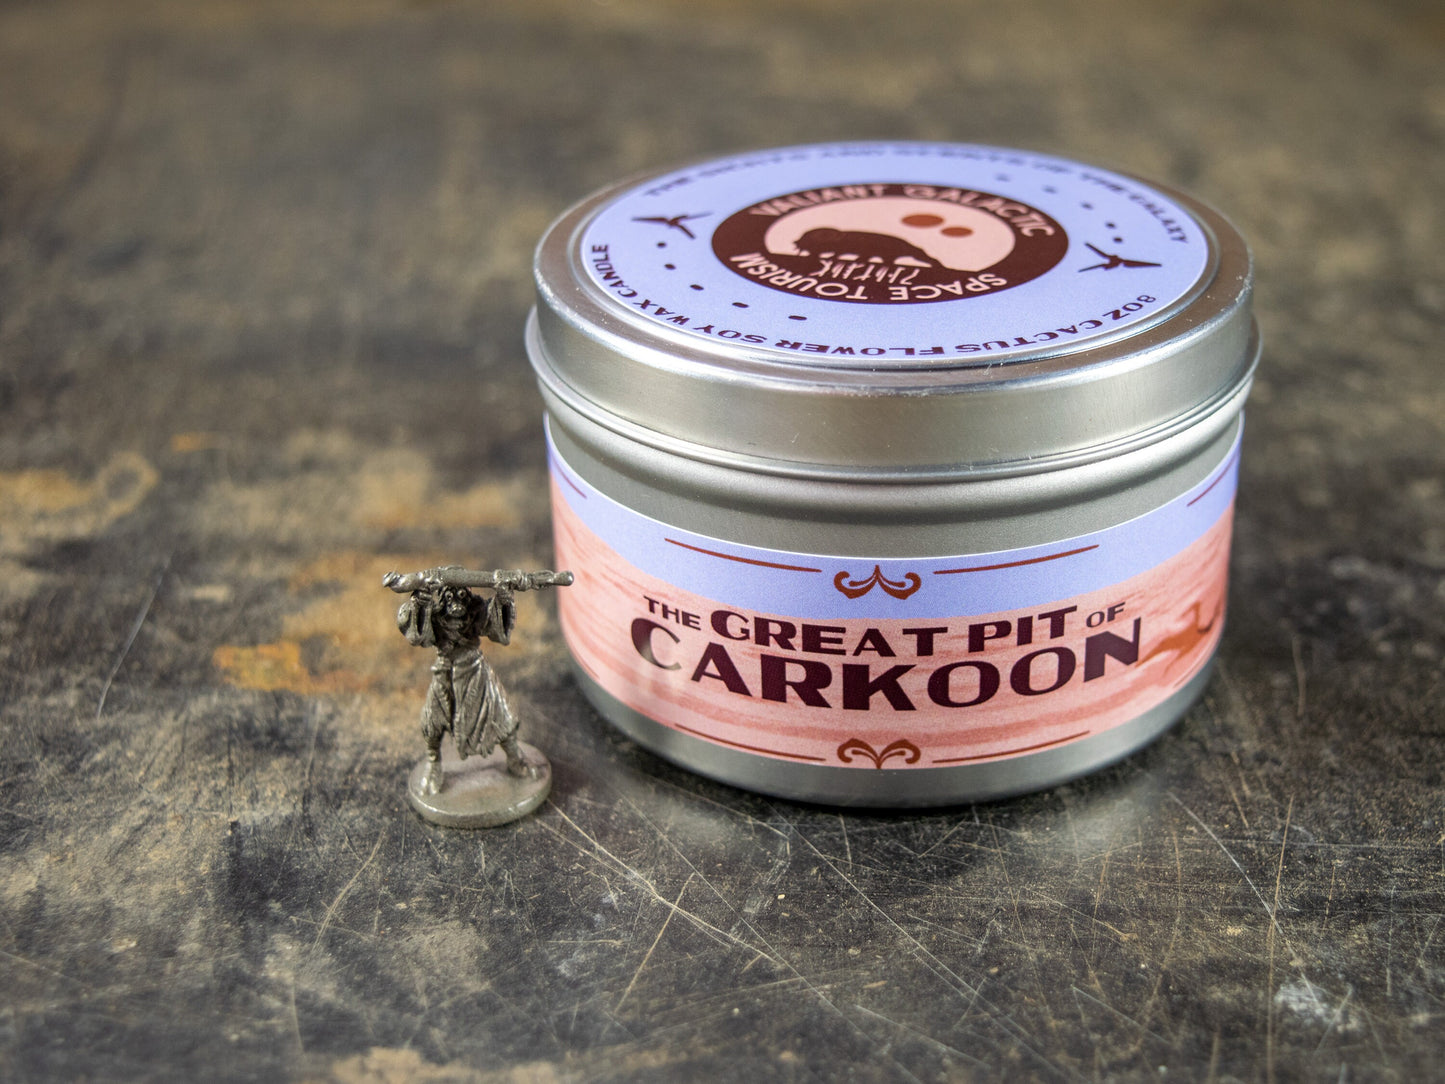 The Great Pit of Carkoon Candle